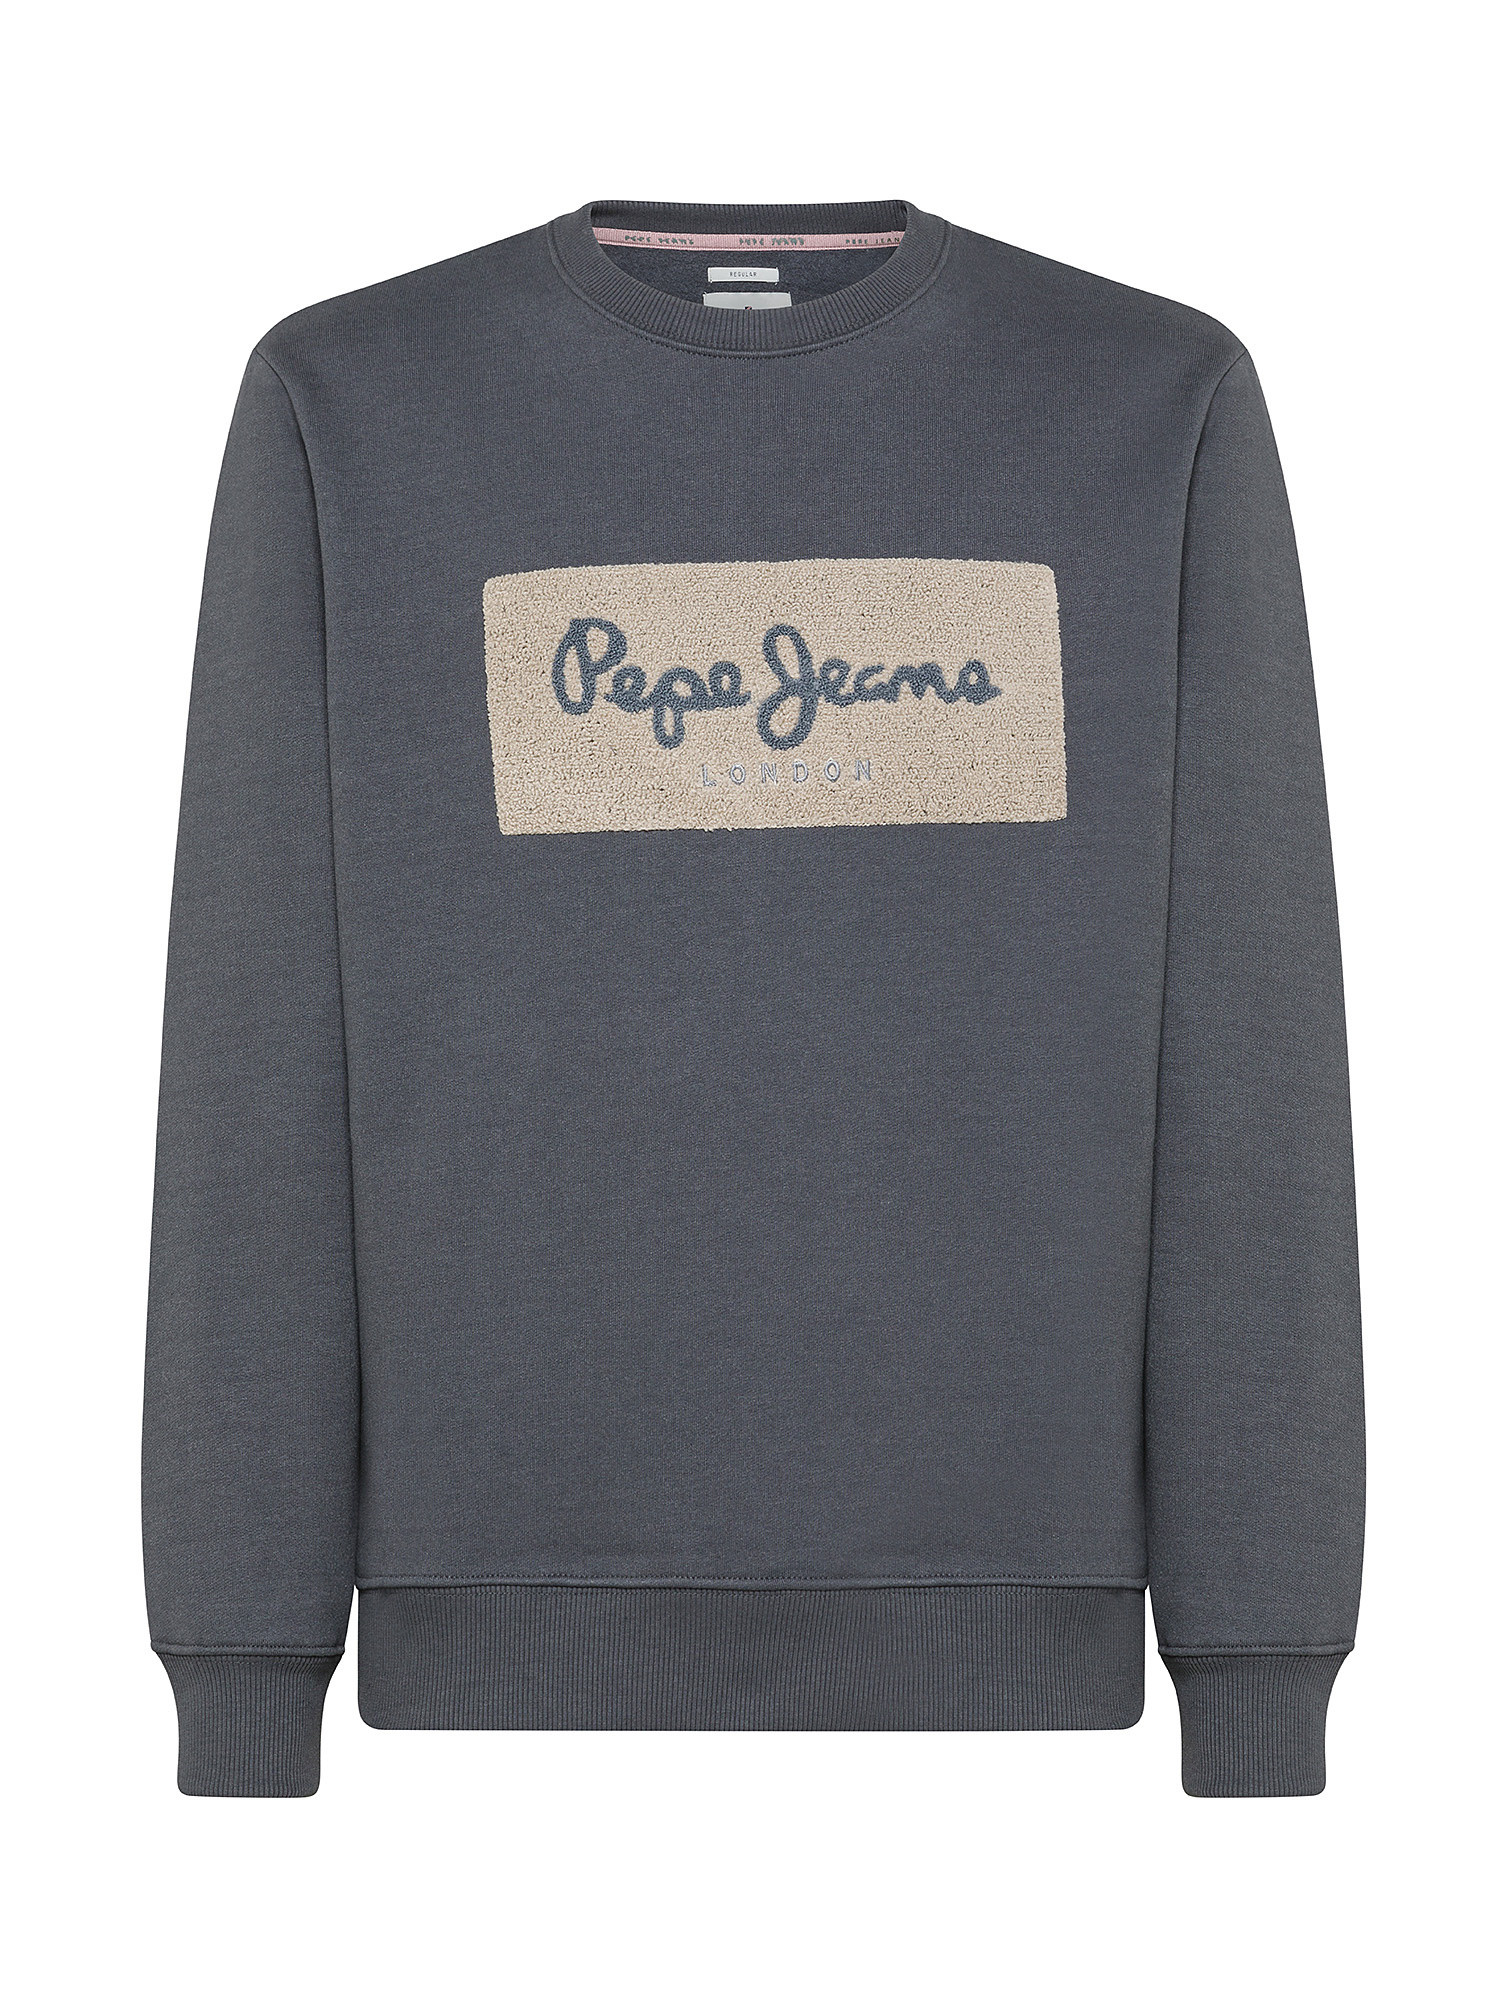 Pepe Jeans - Sweatshirt with embroidered logo, Black, large image number 0